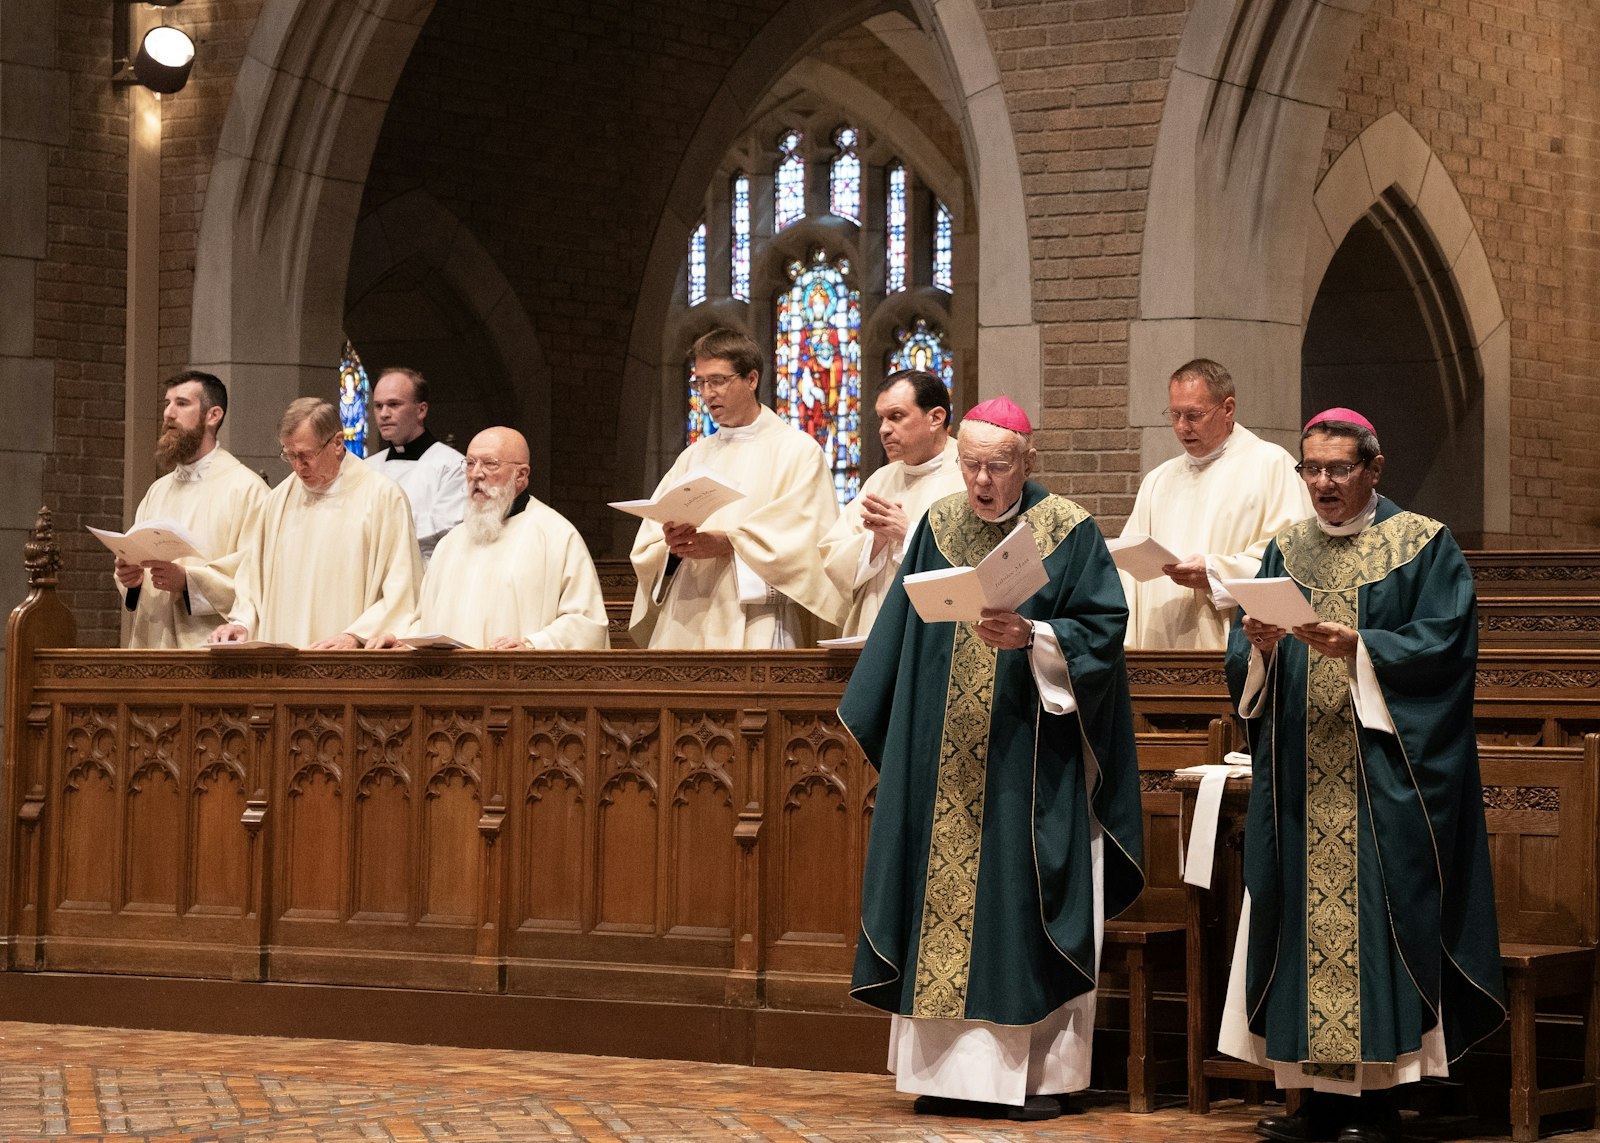 Bishops Donald F. Hanchon and Arturo Cepeda, right, sing alongside priests in choir inside Sacred Heart's chapel. In addition to Bishop Hanchon, who is celebrating his 50th jubilee, another Detroit bishop, Bishop Jeffrey M. Monforton, was among those celebrating 30 years.